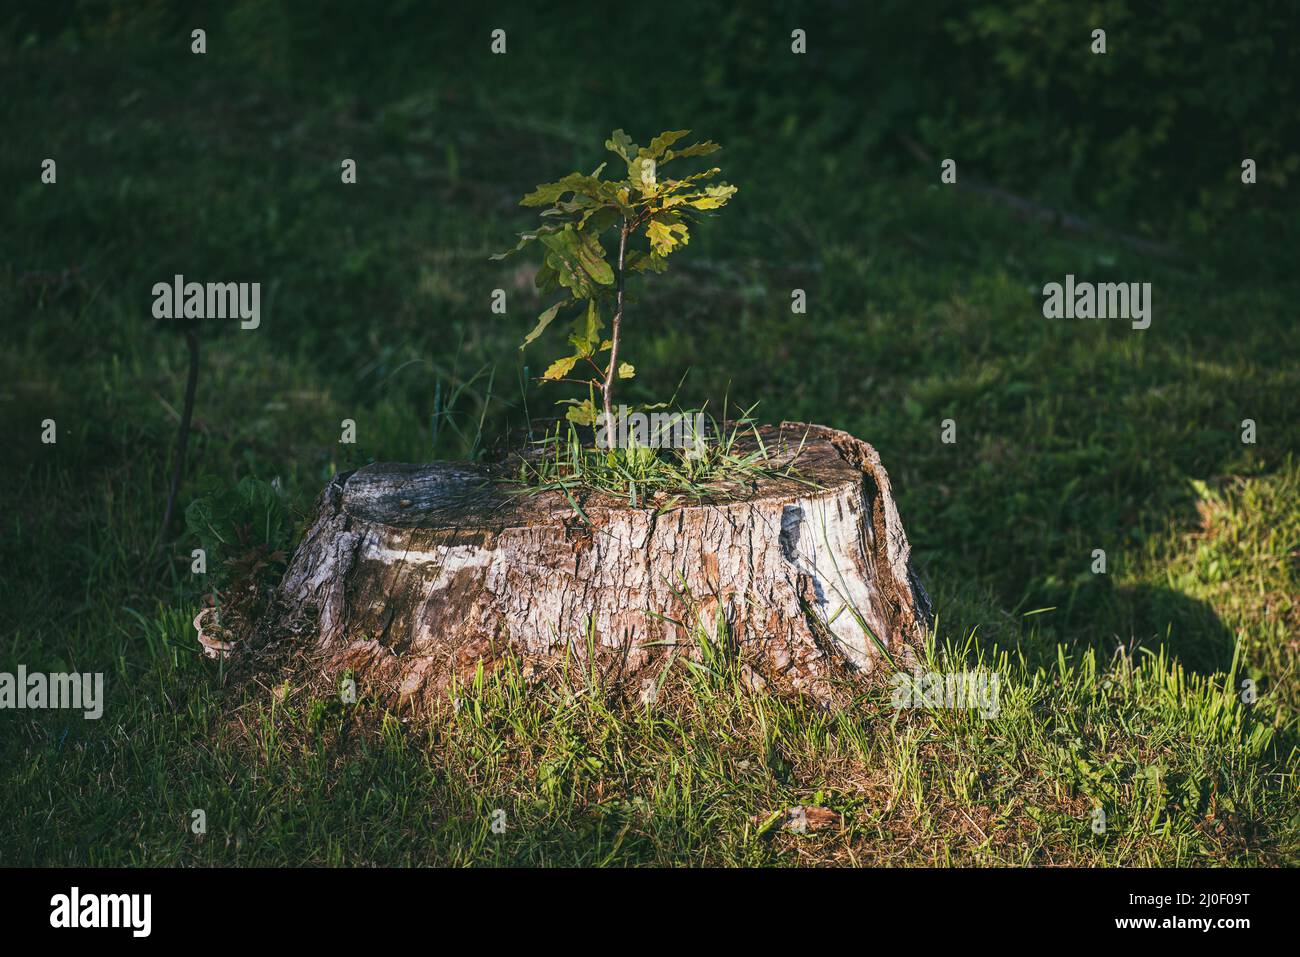 The green shoot of a young oak tree grows from the stump of a tree that was once cut down. The concept of overcoming and the ide Stock Photo